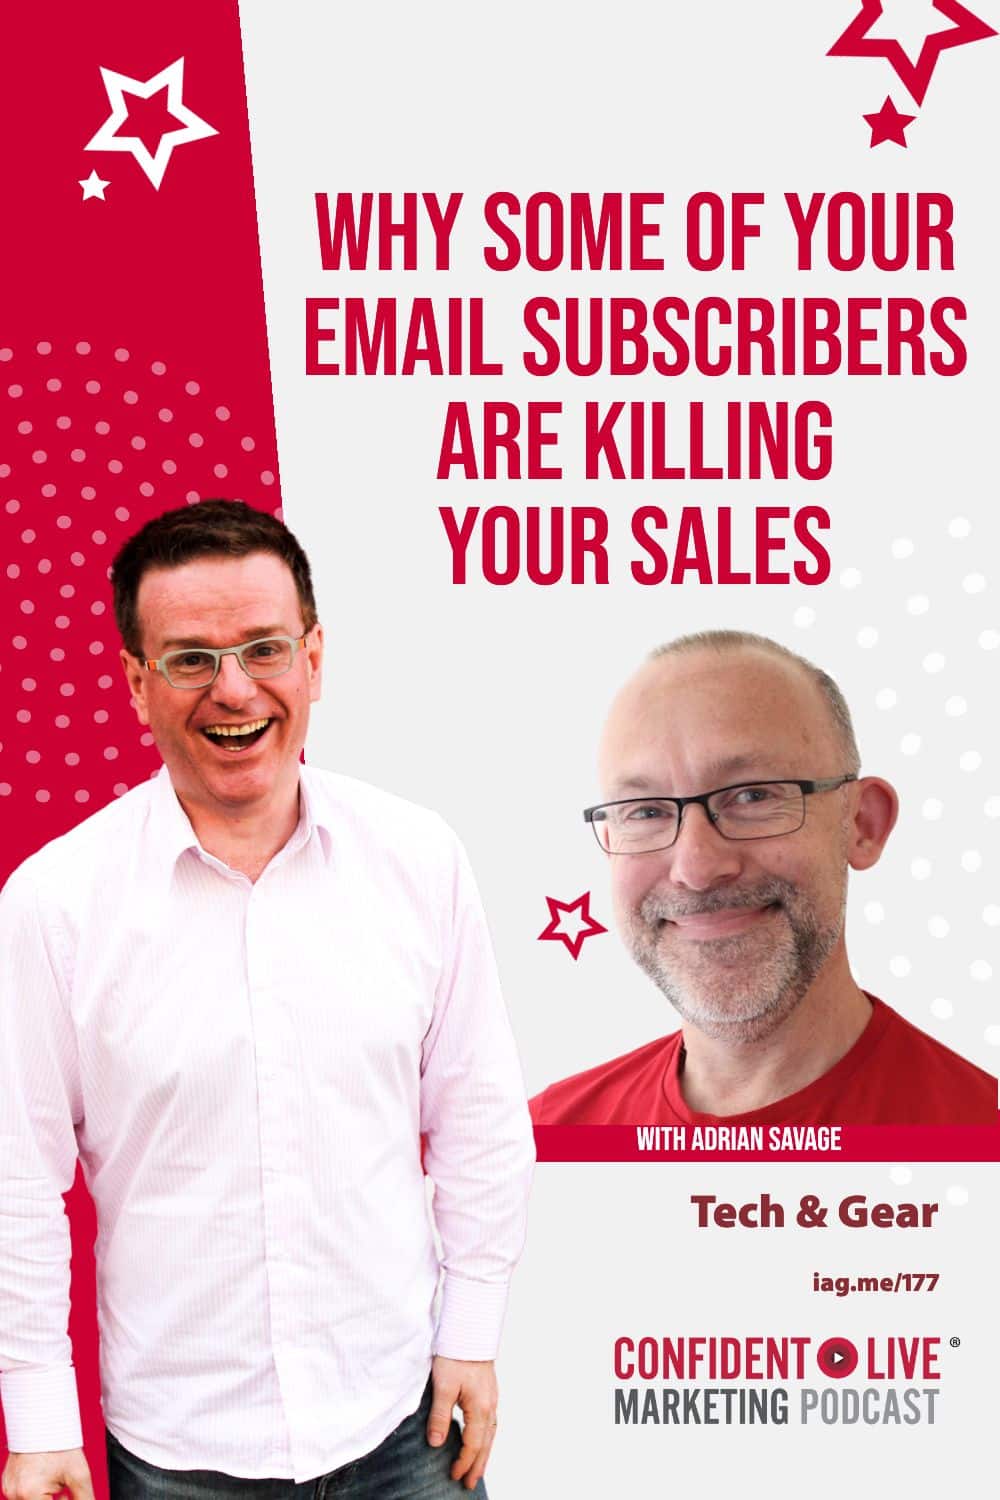 Why Some of Your Email Subscribers are Killing Your Sales